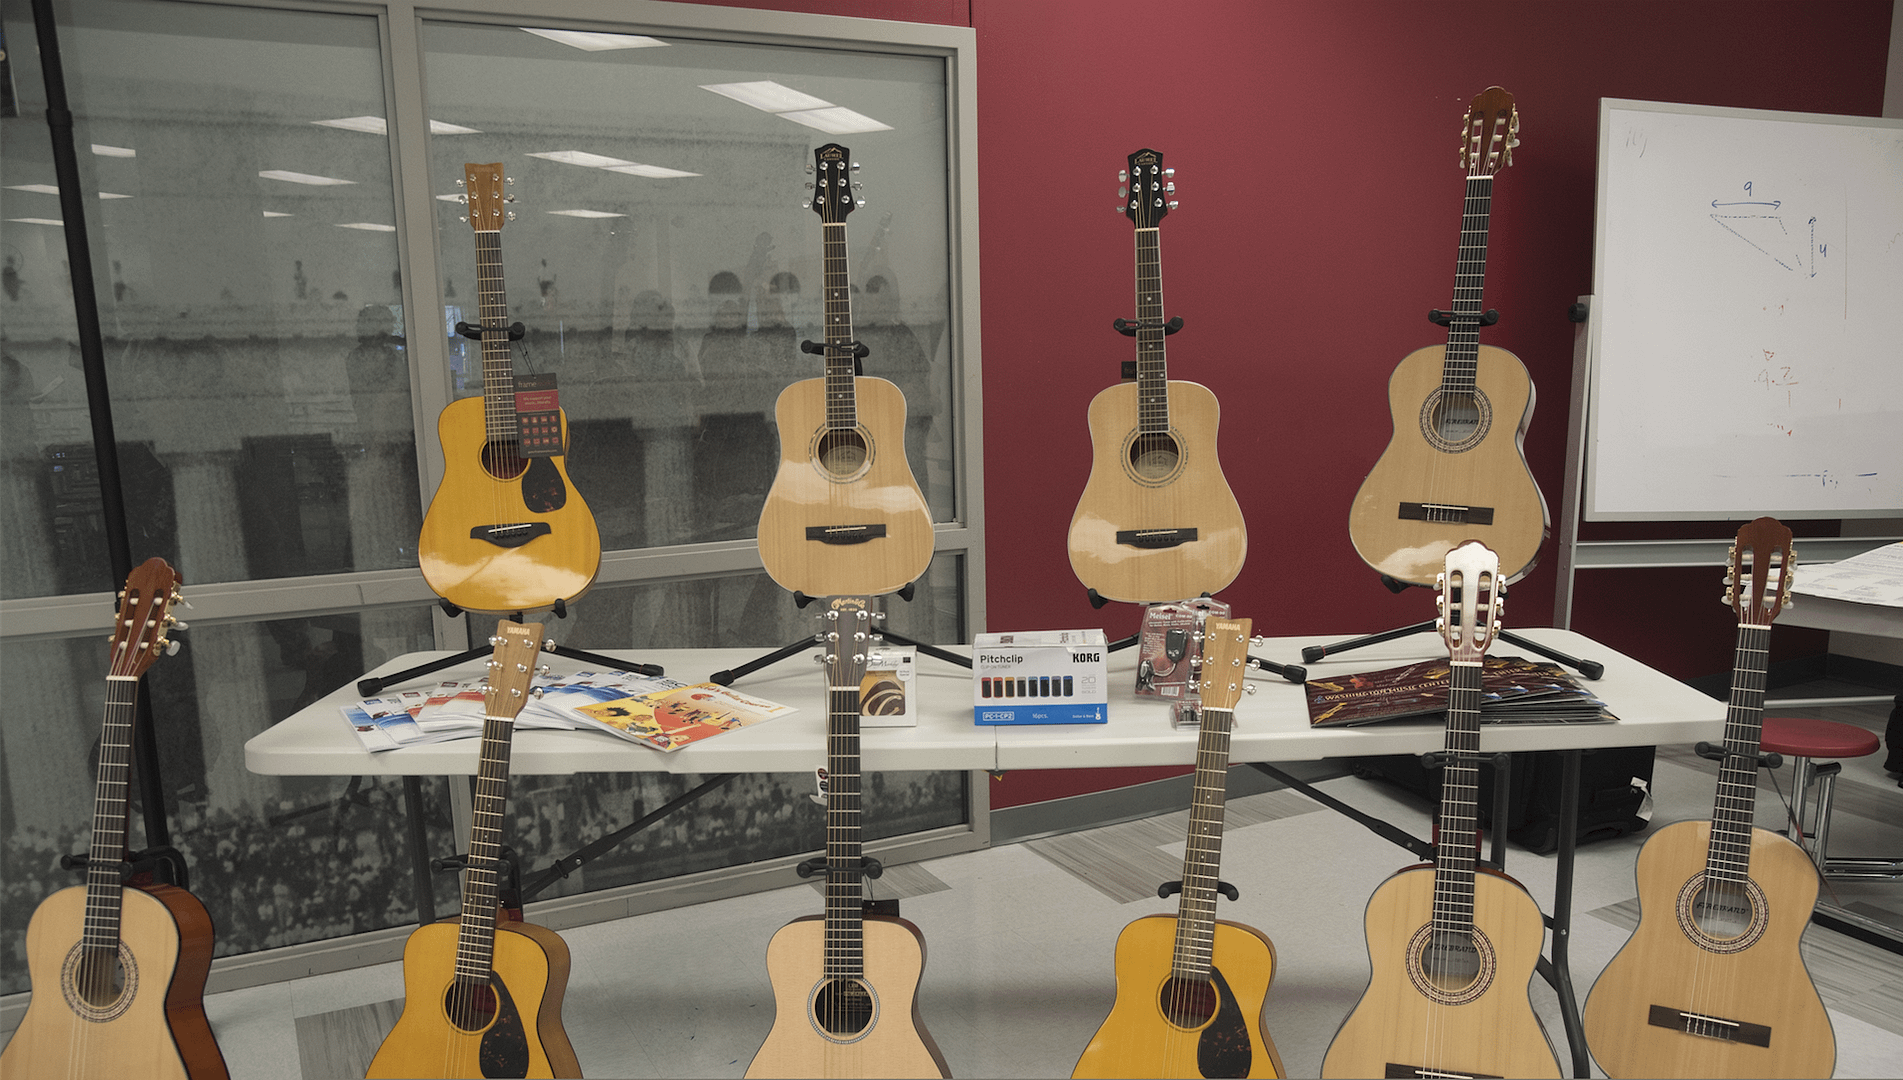 Guitars donated at NAMM Day of Service